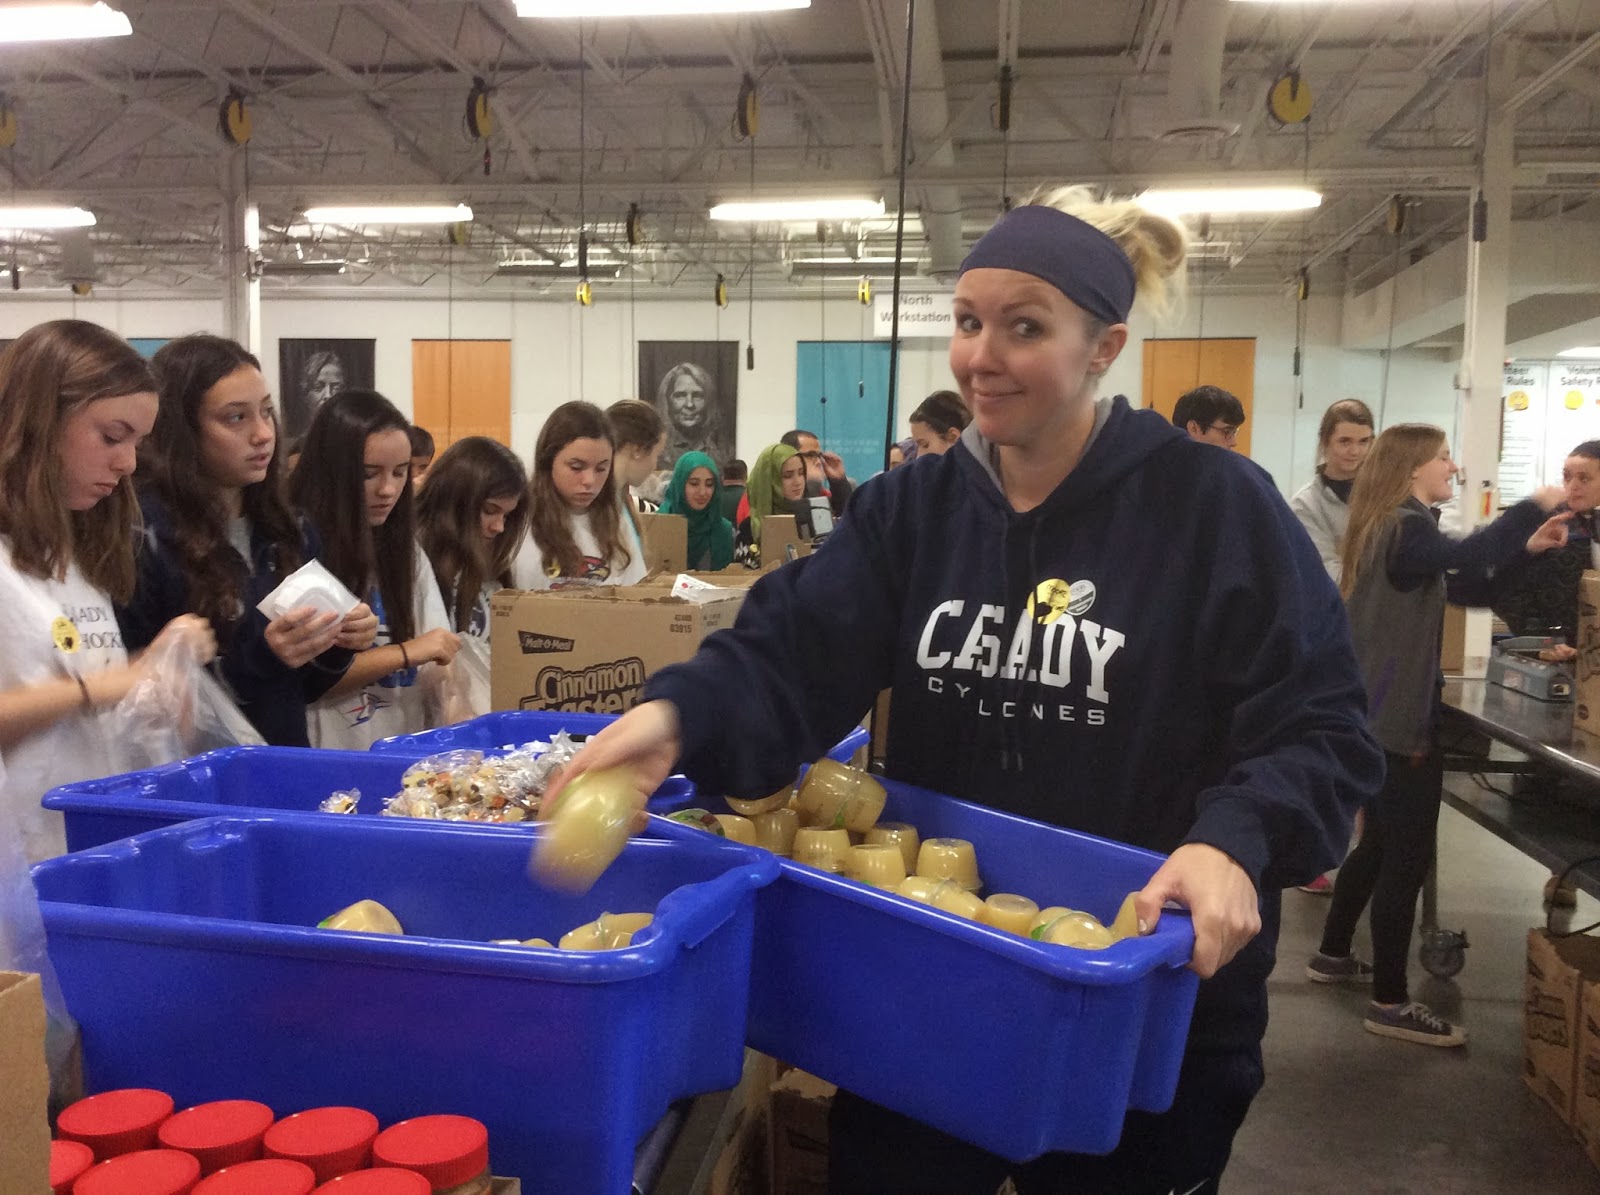 Regional Food Bank continues to pack food during walkout